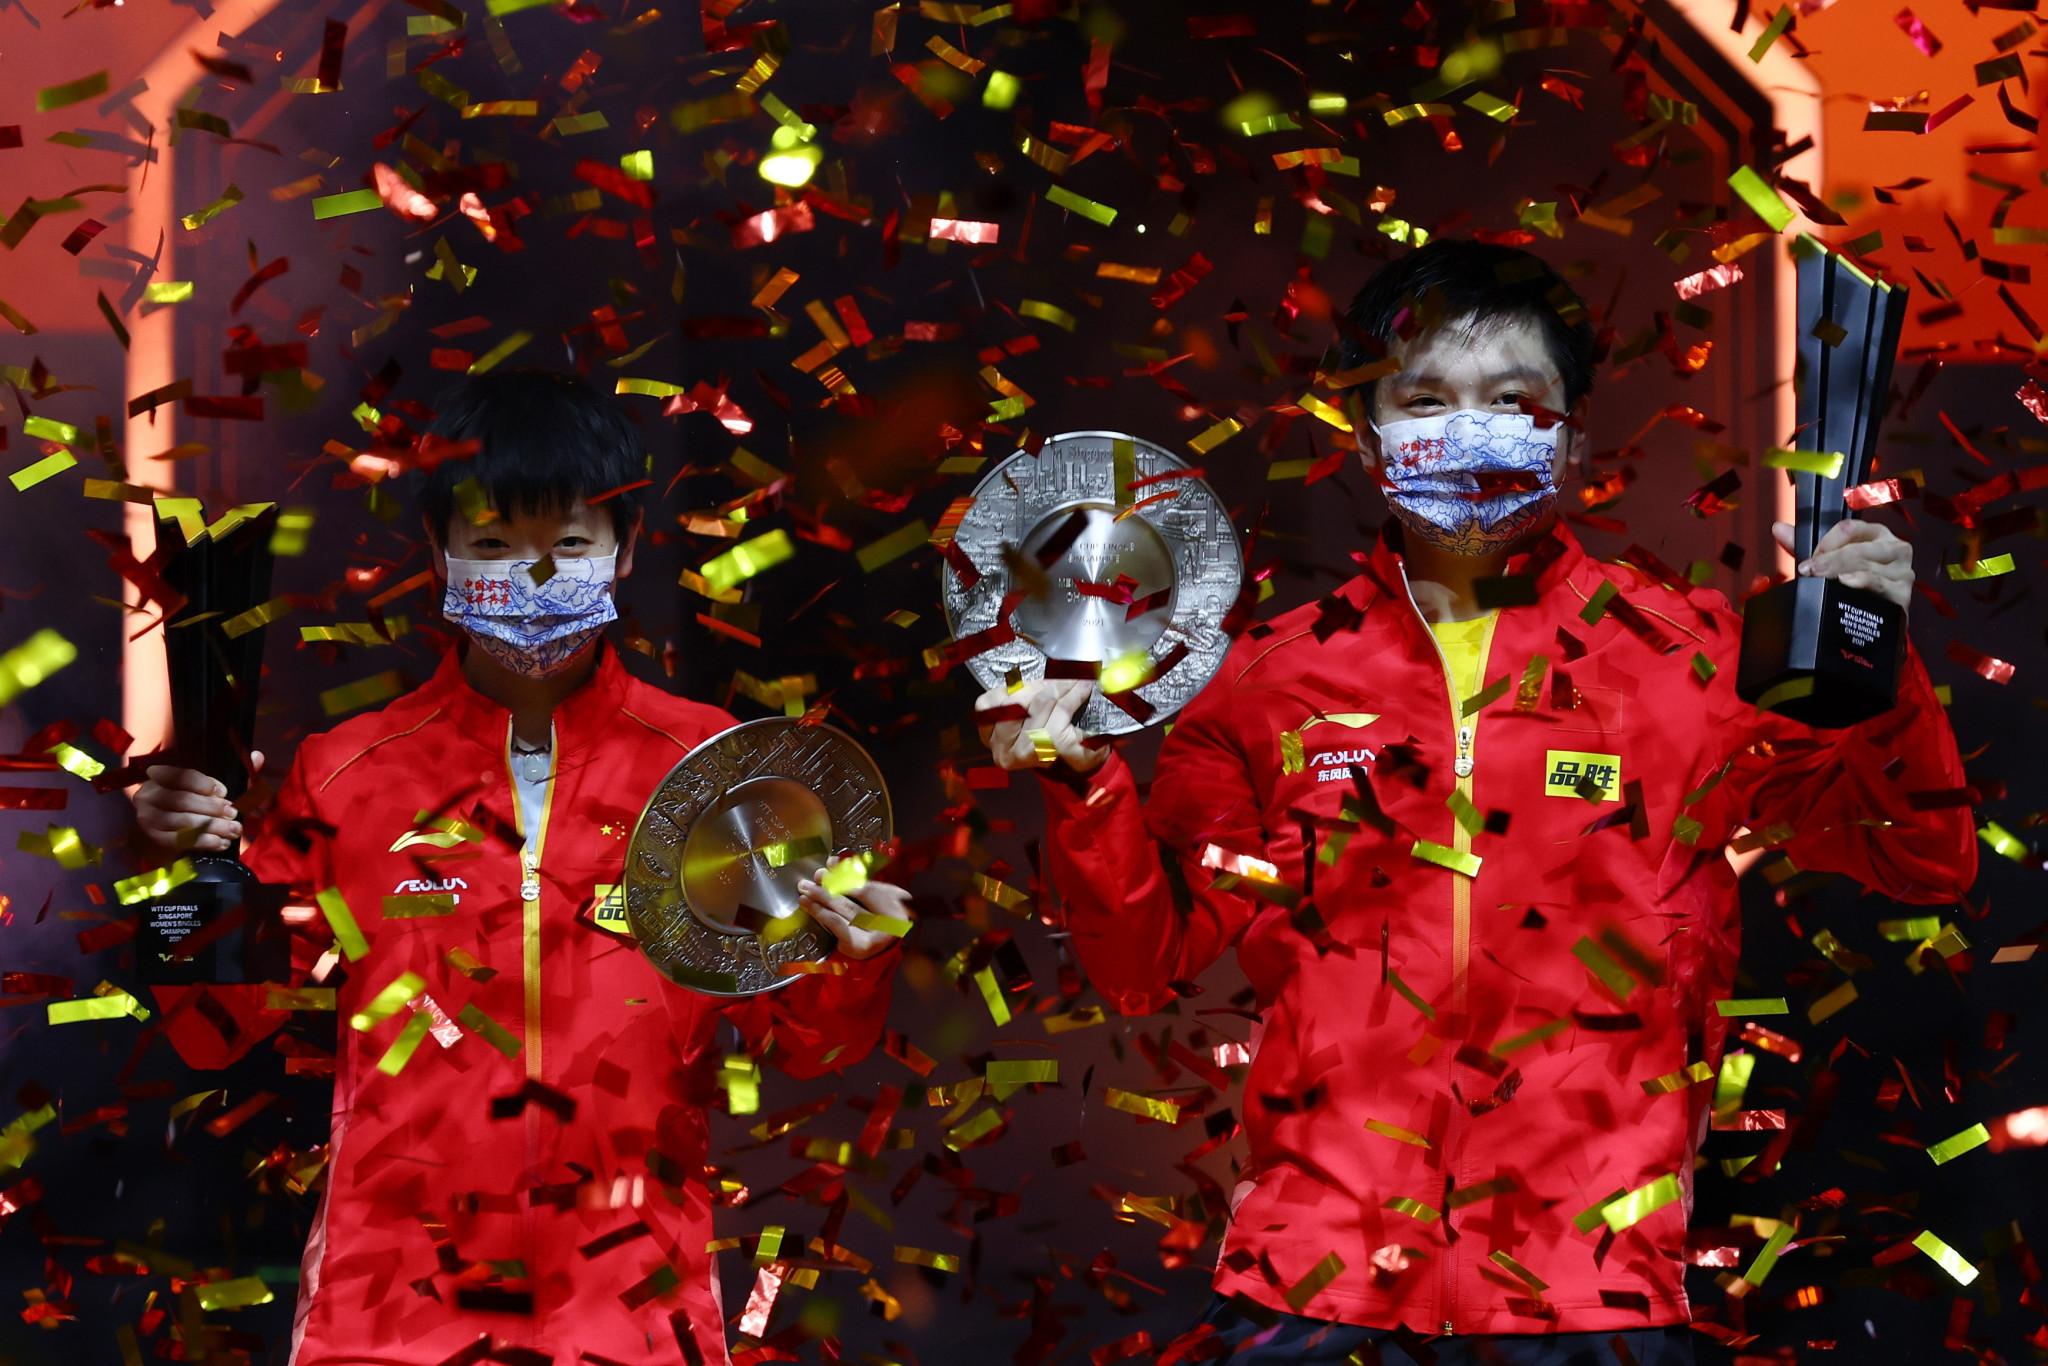 Sun Yingsha and Fan Zhendong celebrate after winning the respective women's and men's titles in Singapore ©Getty Images